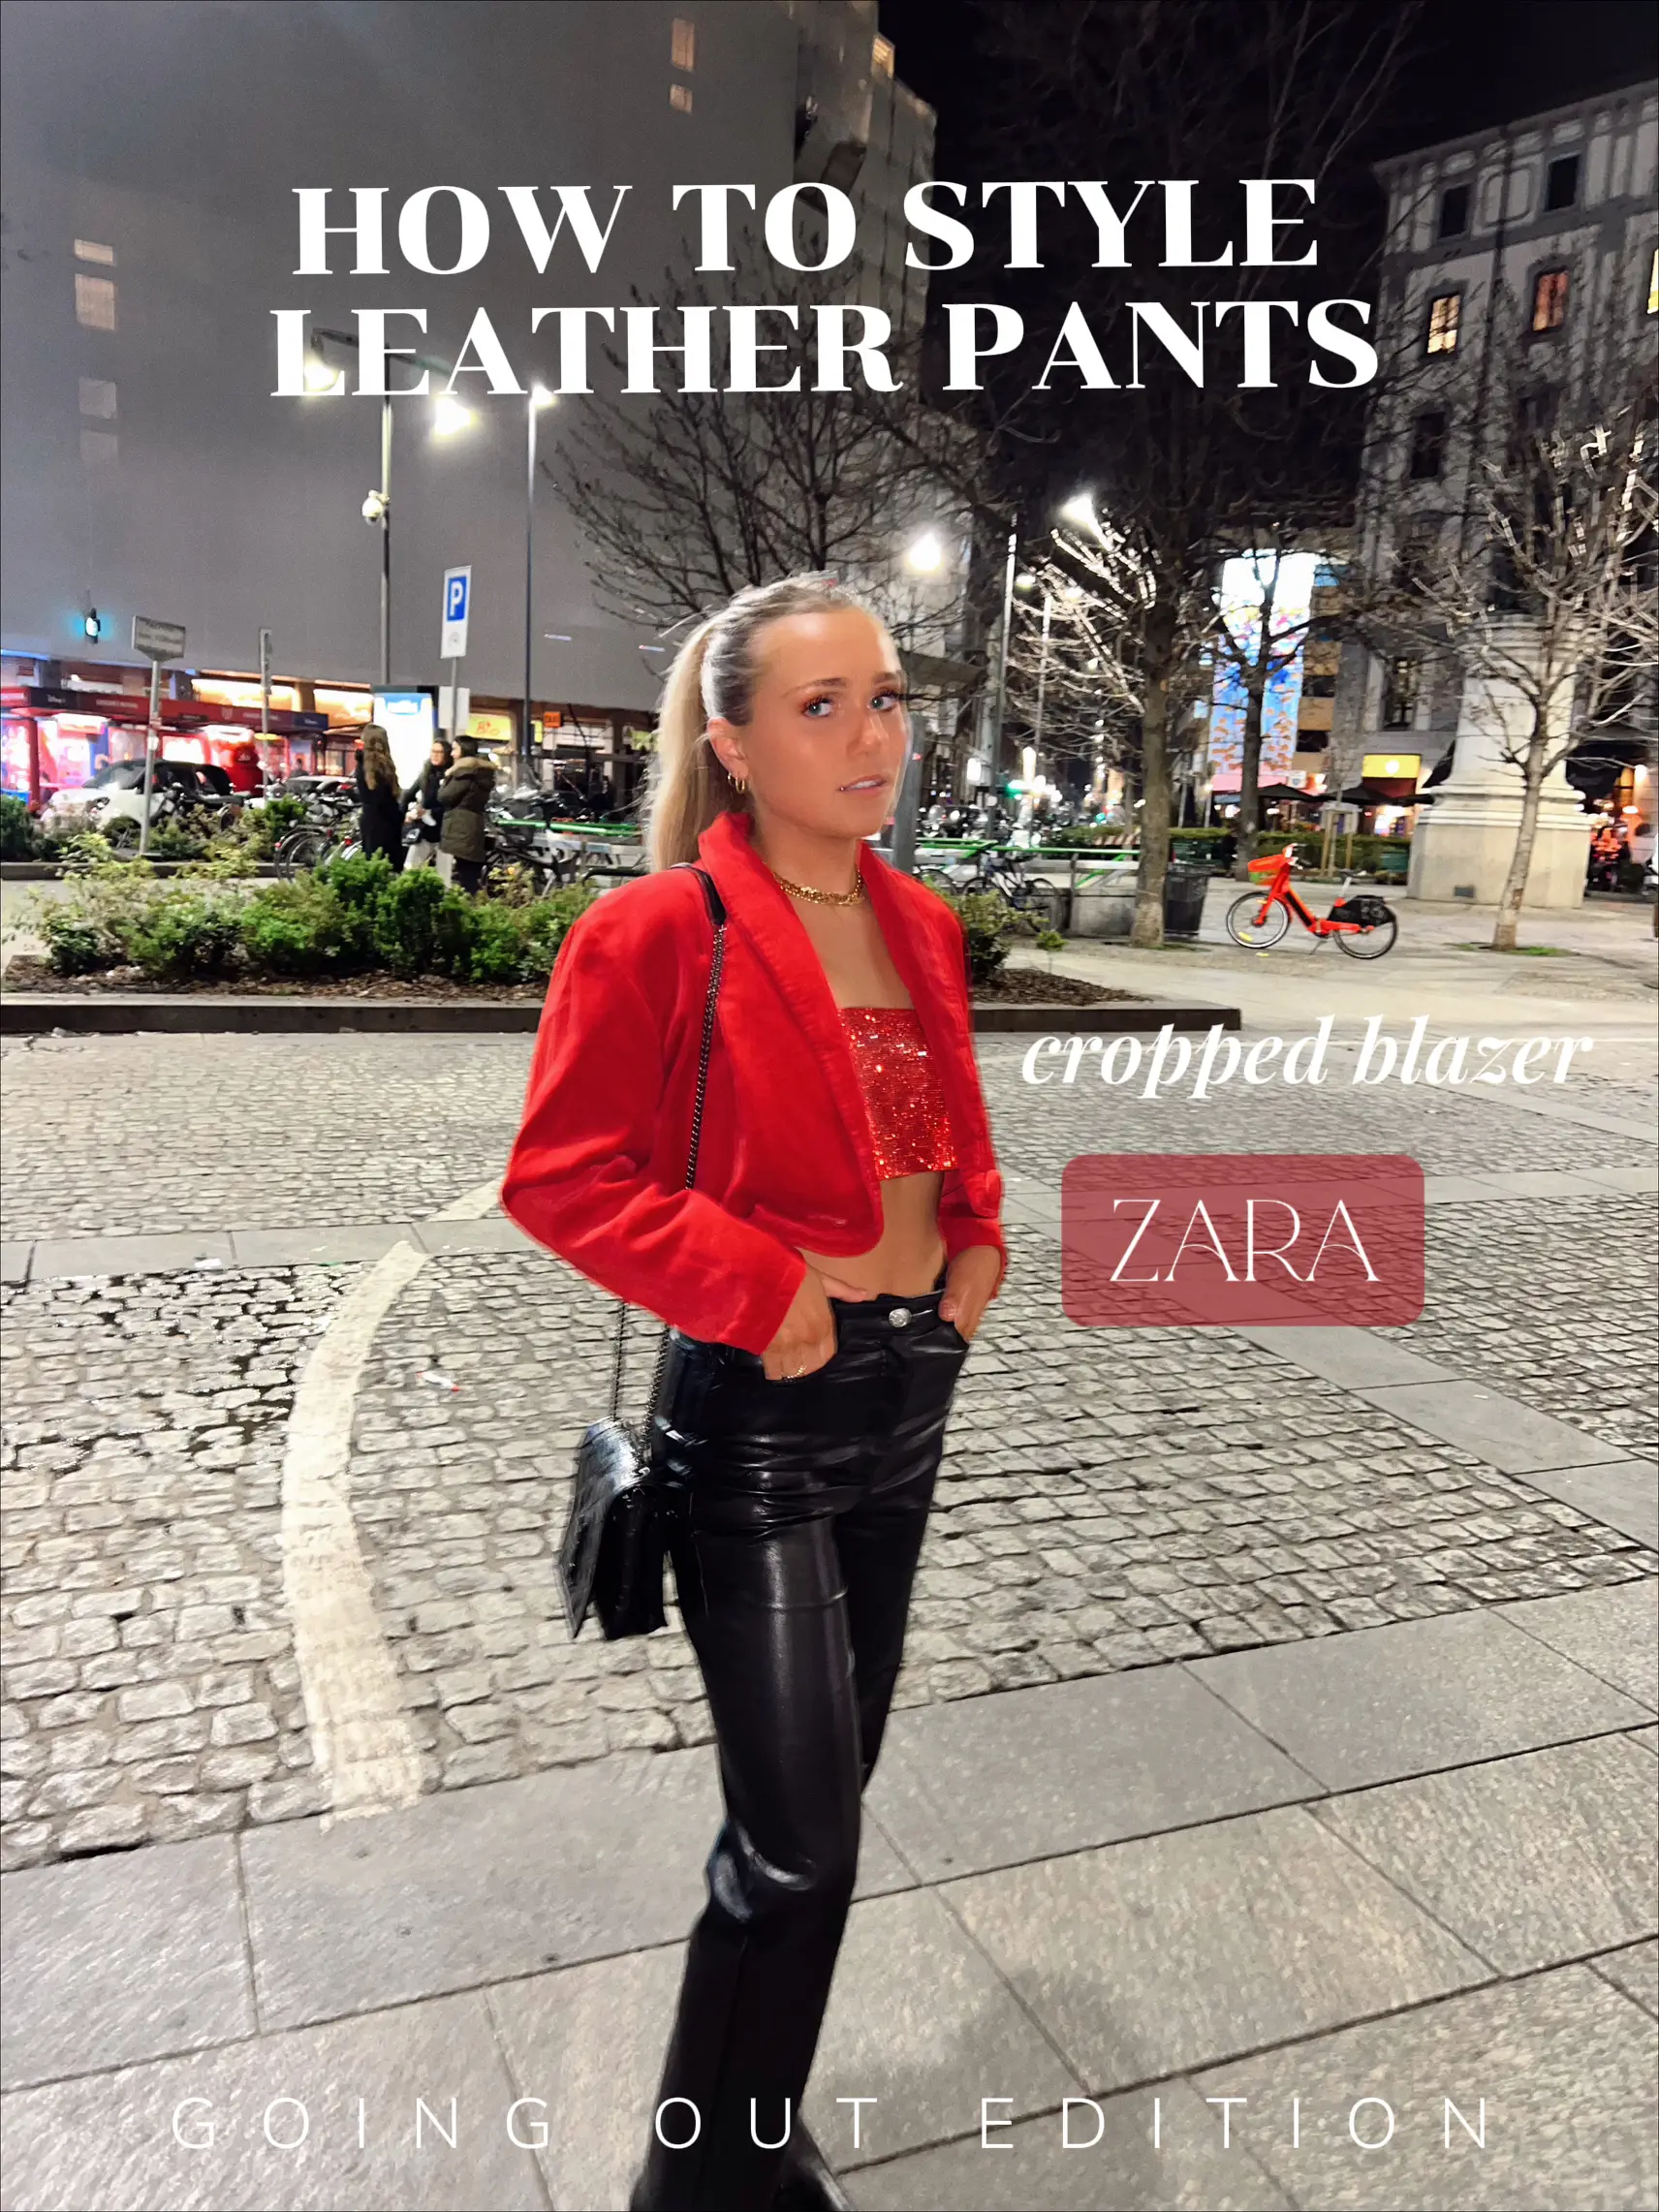 Red Leather Pants Outfit Ideas   Red leather pants, Leather pants  outfit, Leather pants